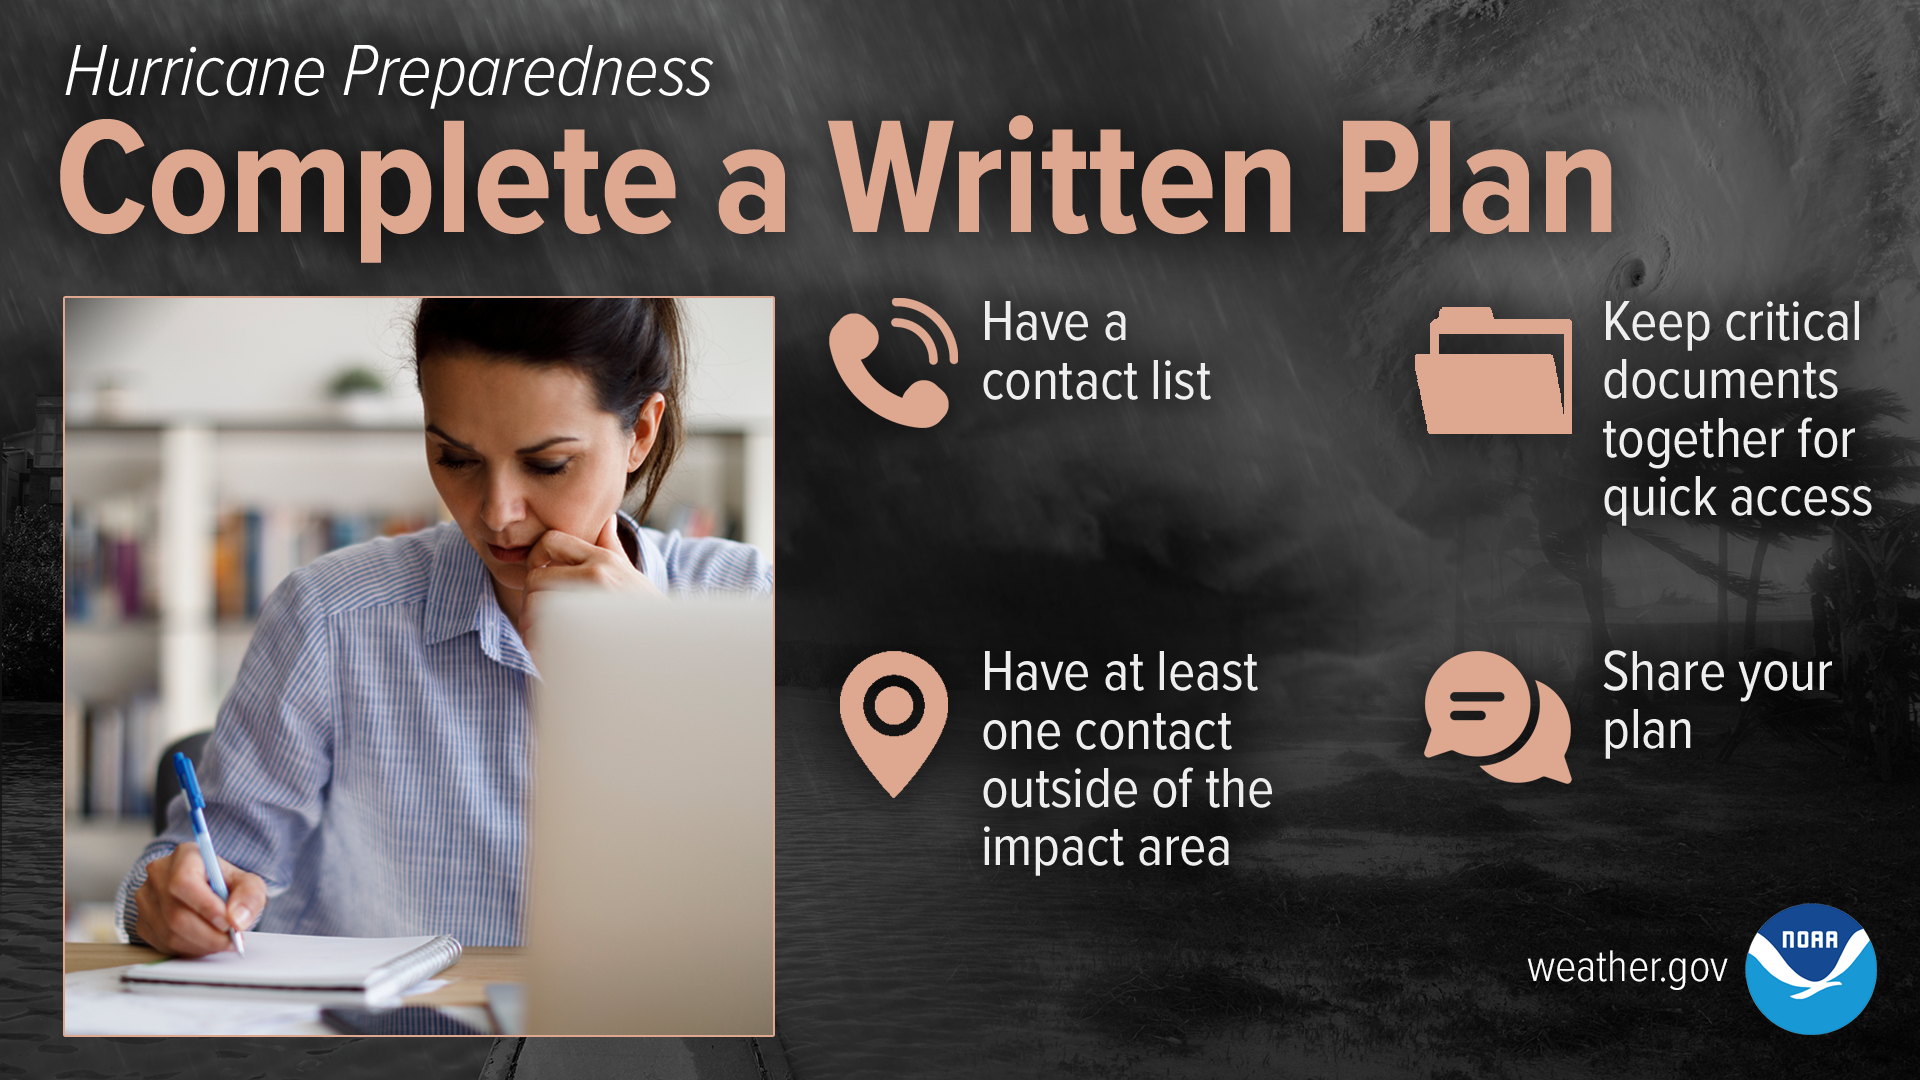 Hurricane Preparedness: Complete A Written Hurricane Plan. Writing down your hurricane plan will help you avoid mistakes during an emergency, and ensure everyone in your home is prepared for the storm. Have a list of essential contacts, including outside the potential impact area. Keep critical documents together for quick access. Review and practice your plan with your family and friends.